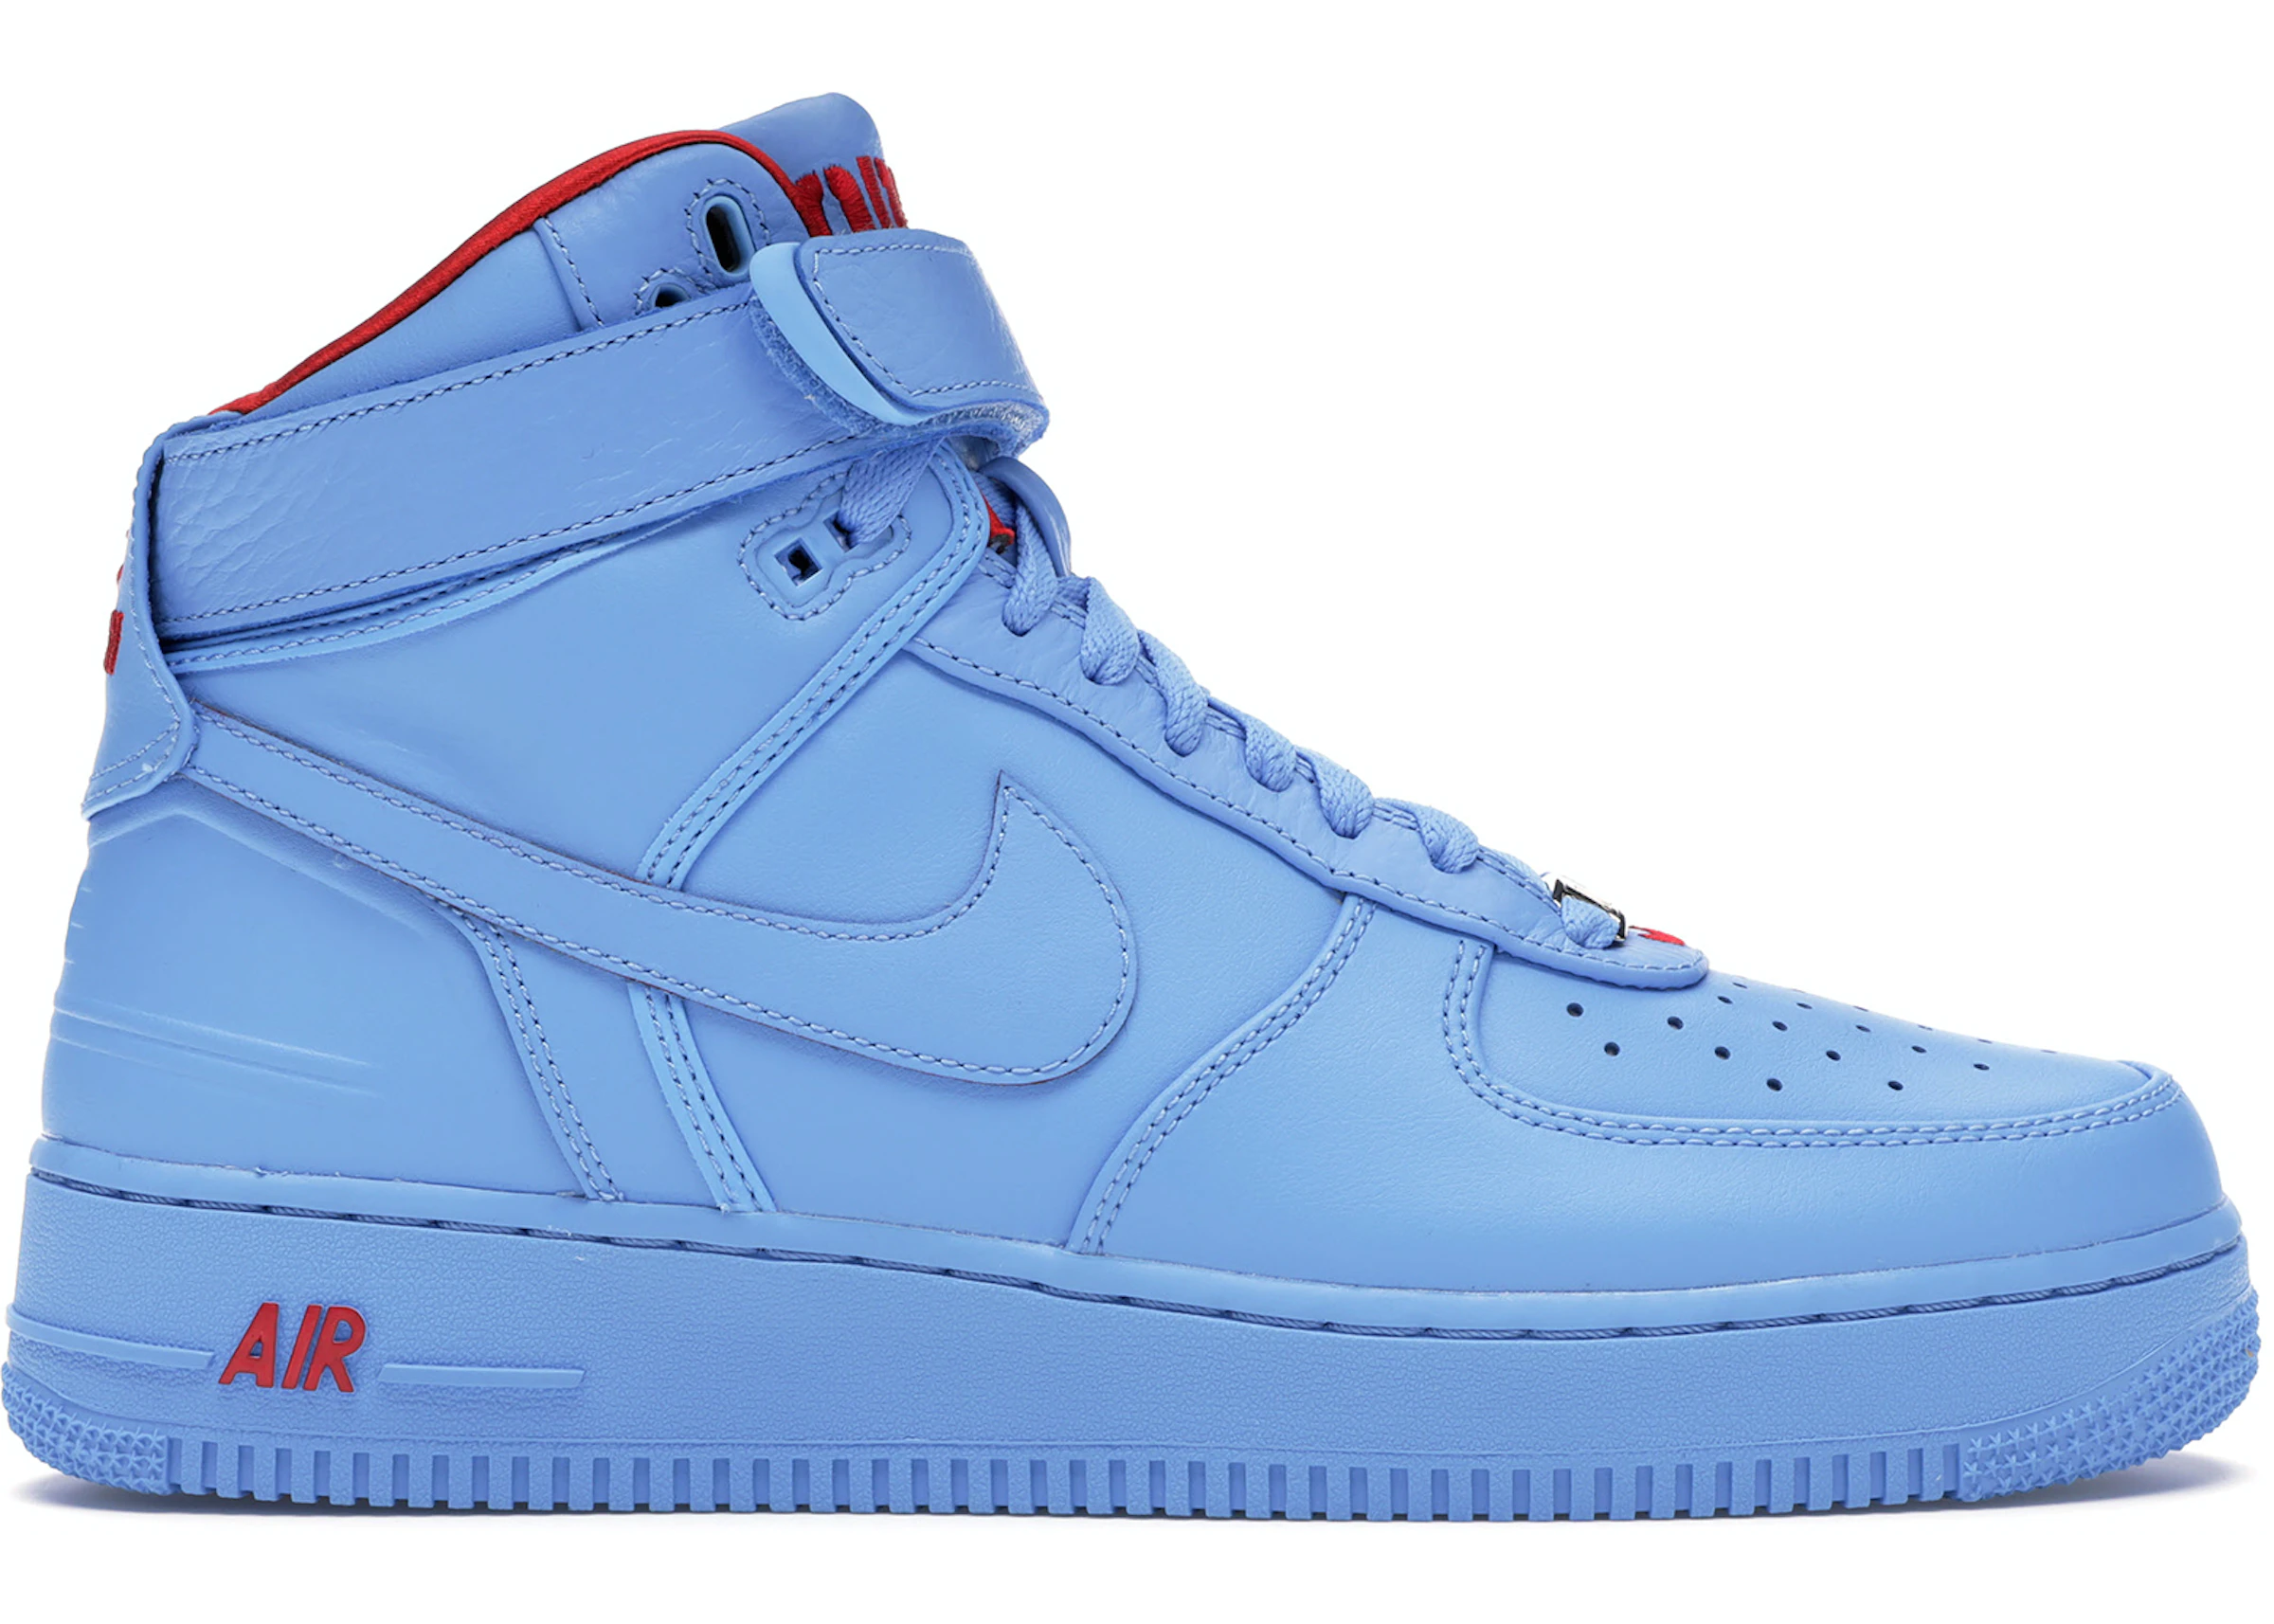 wervelkolom Afleiding Andere plaatsen Nike Air Force 1 High Just Don All-Star Blue - CW3812-400 - US